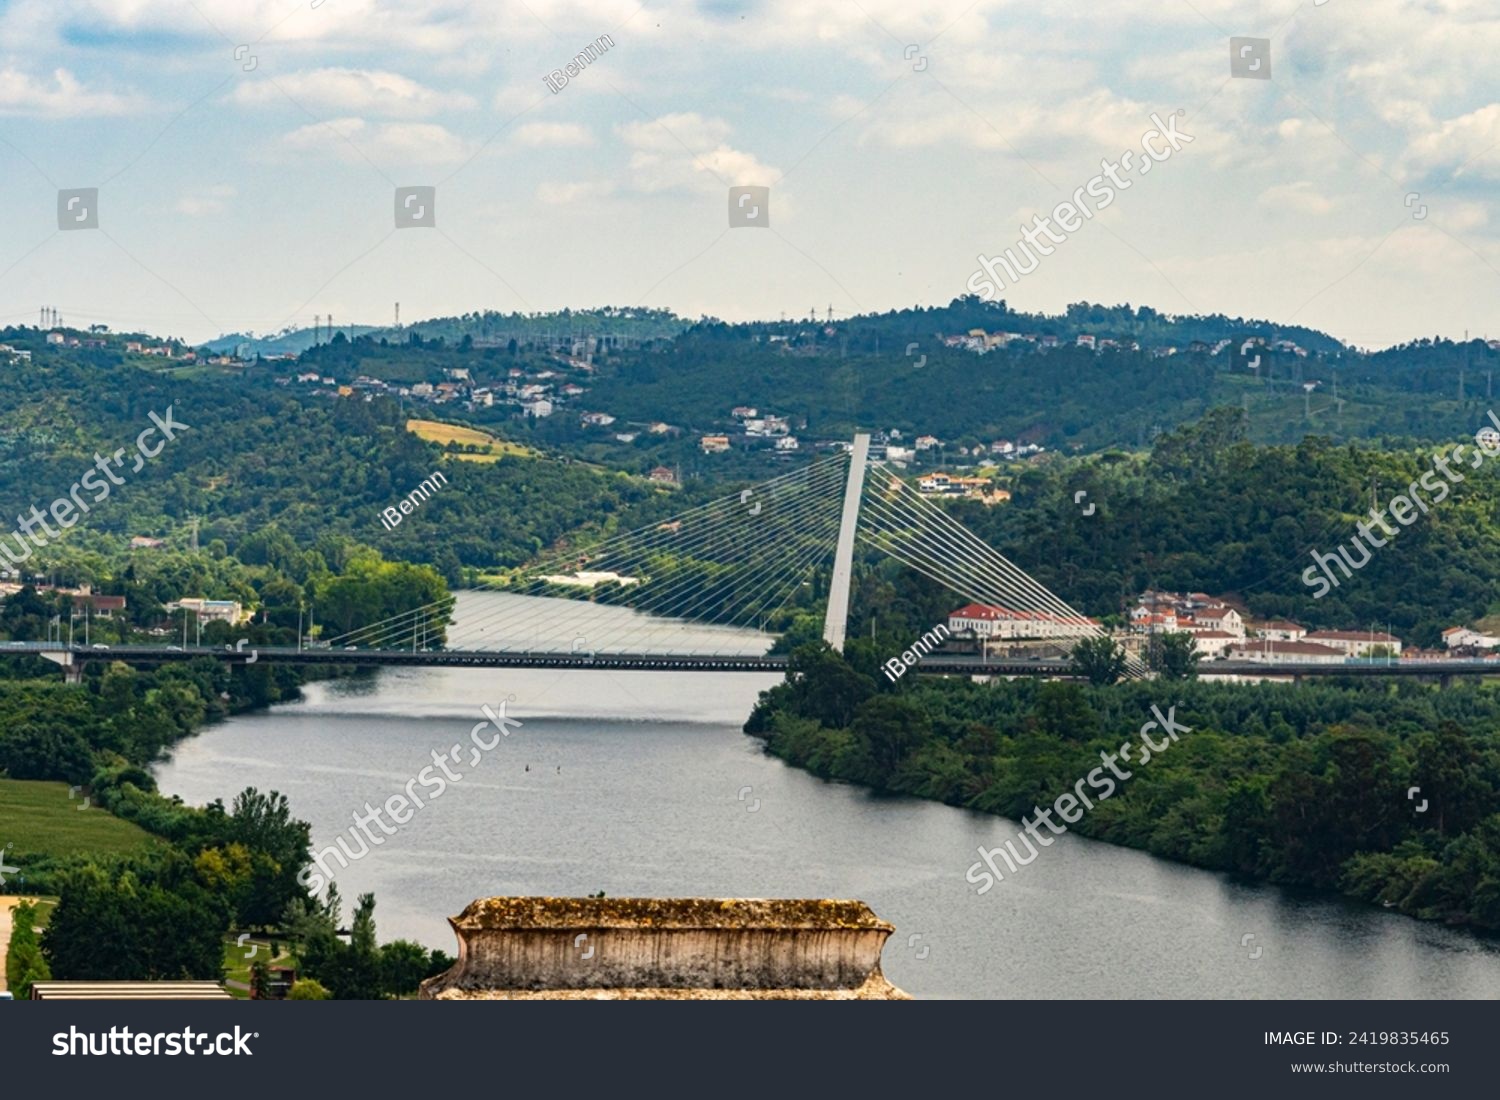 Scenery of Coimbra City in the summertime with the Mondego River and surrounding trees under a clear sky. Landscape background and wallpaper. #2419835465